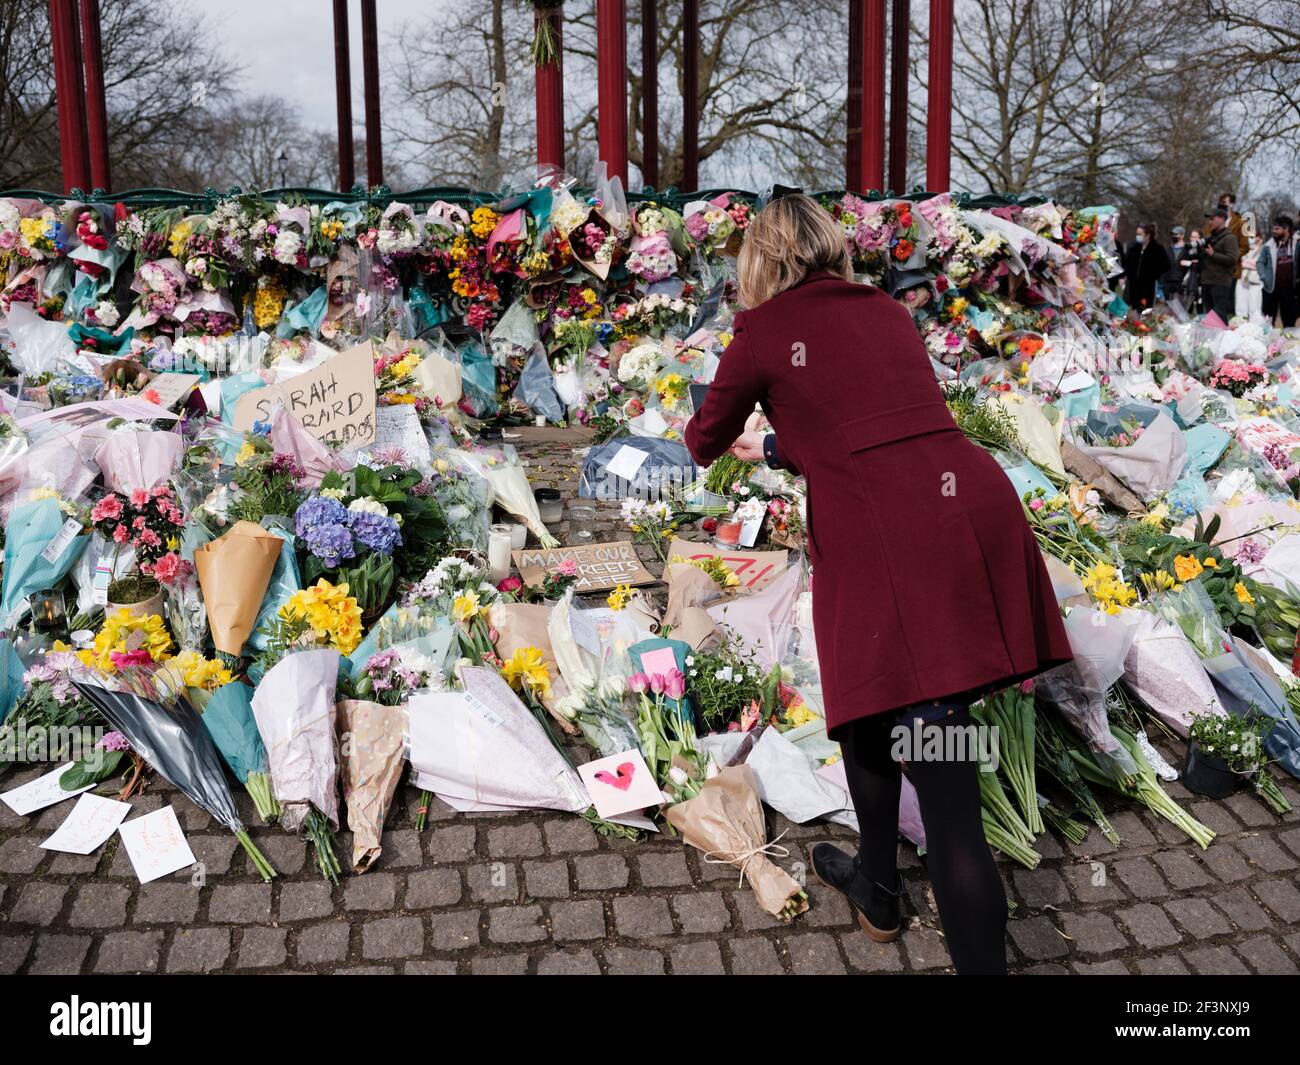 A mourner places flowers and light candles for Sarah Everard at the bandstand in Clapham Common, March 14, 2021 Stock Photo